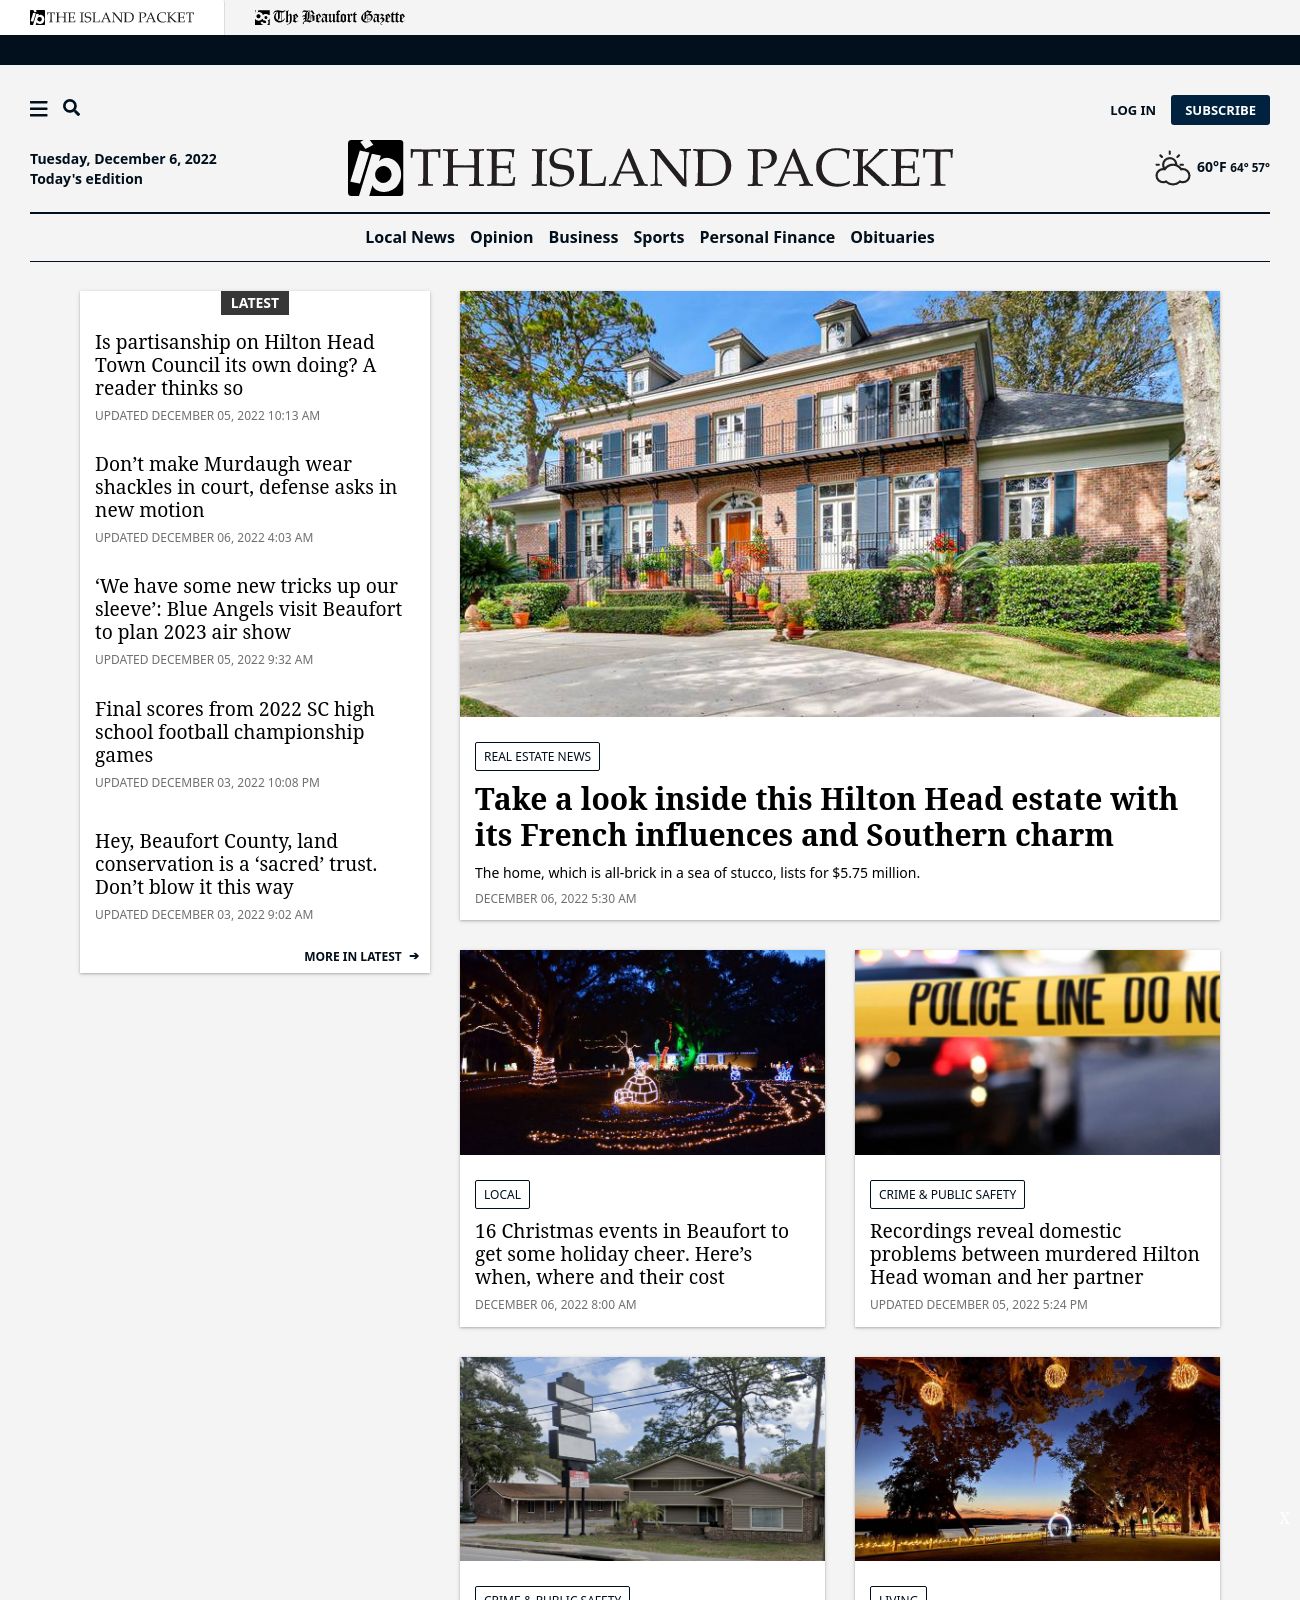 The Island Packet